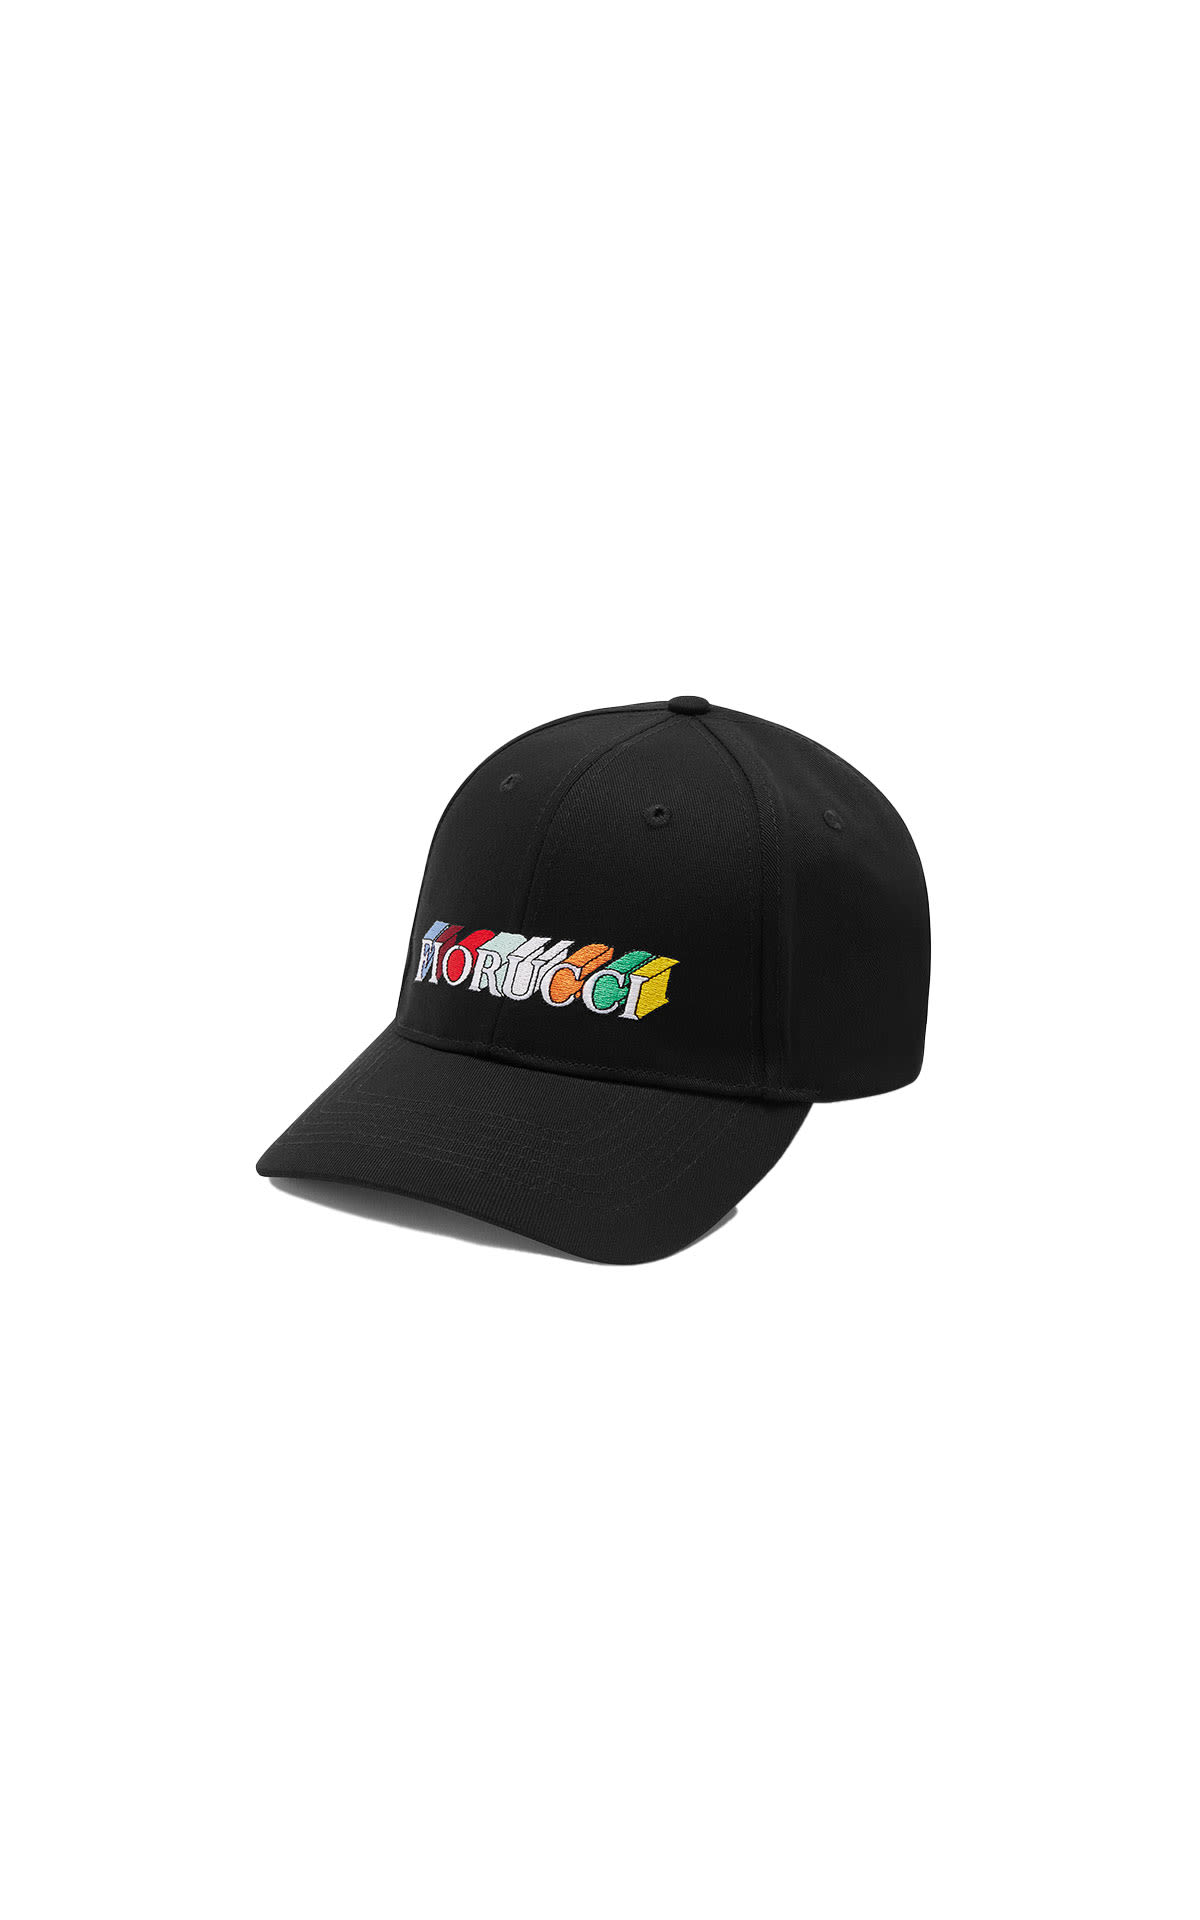 Fiorucci Embroidered logo cap from Bicester Village